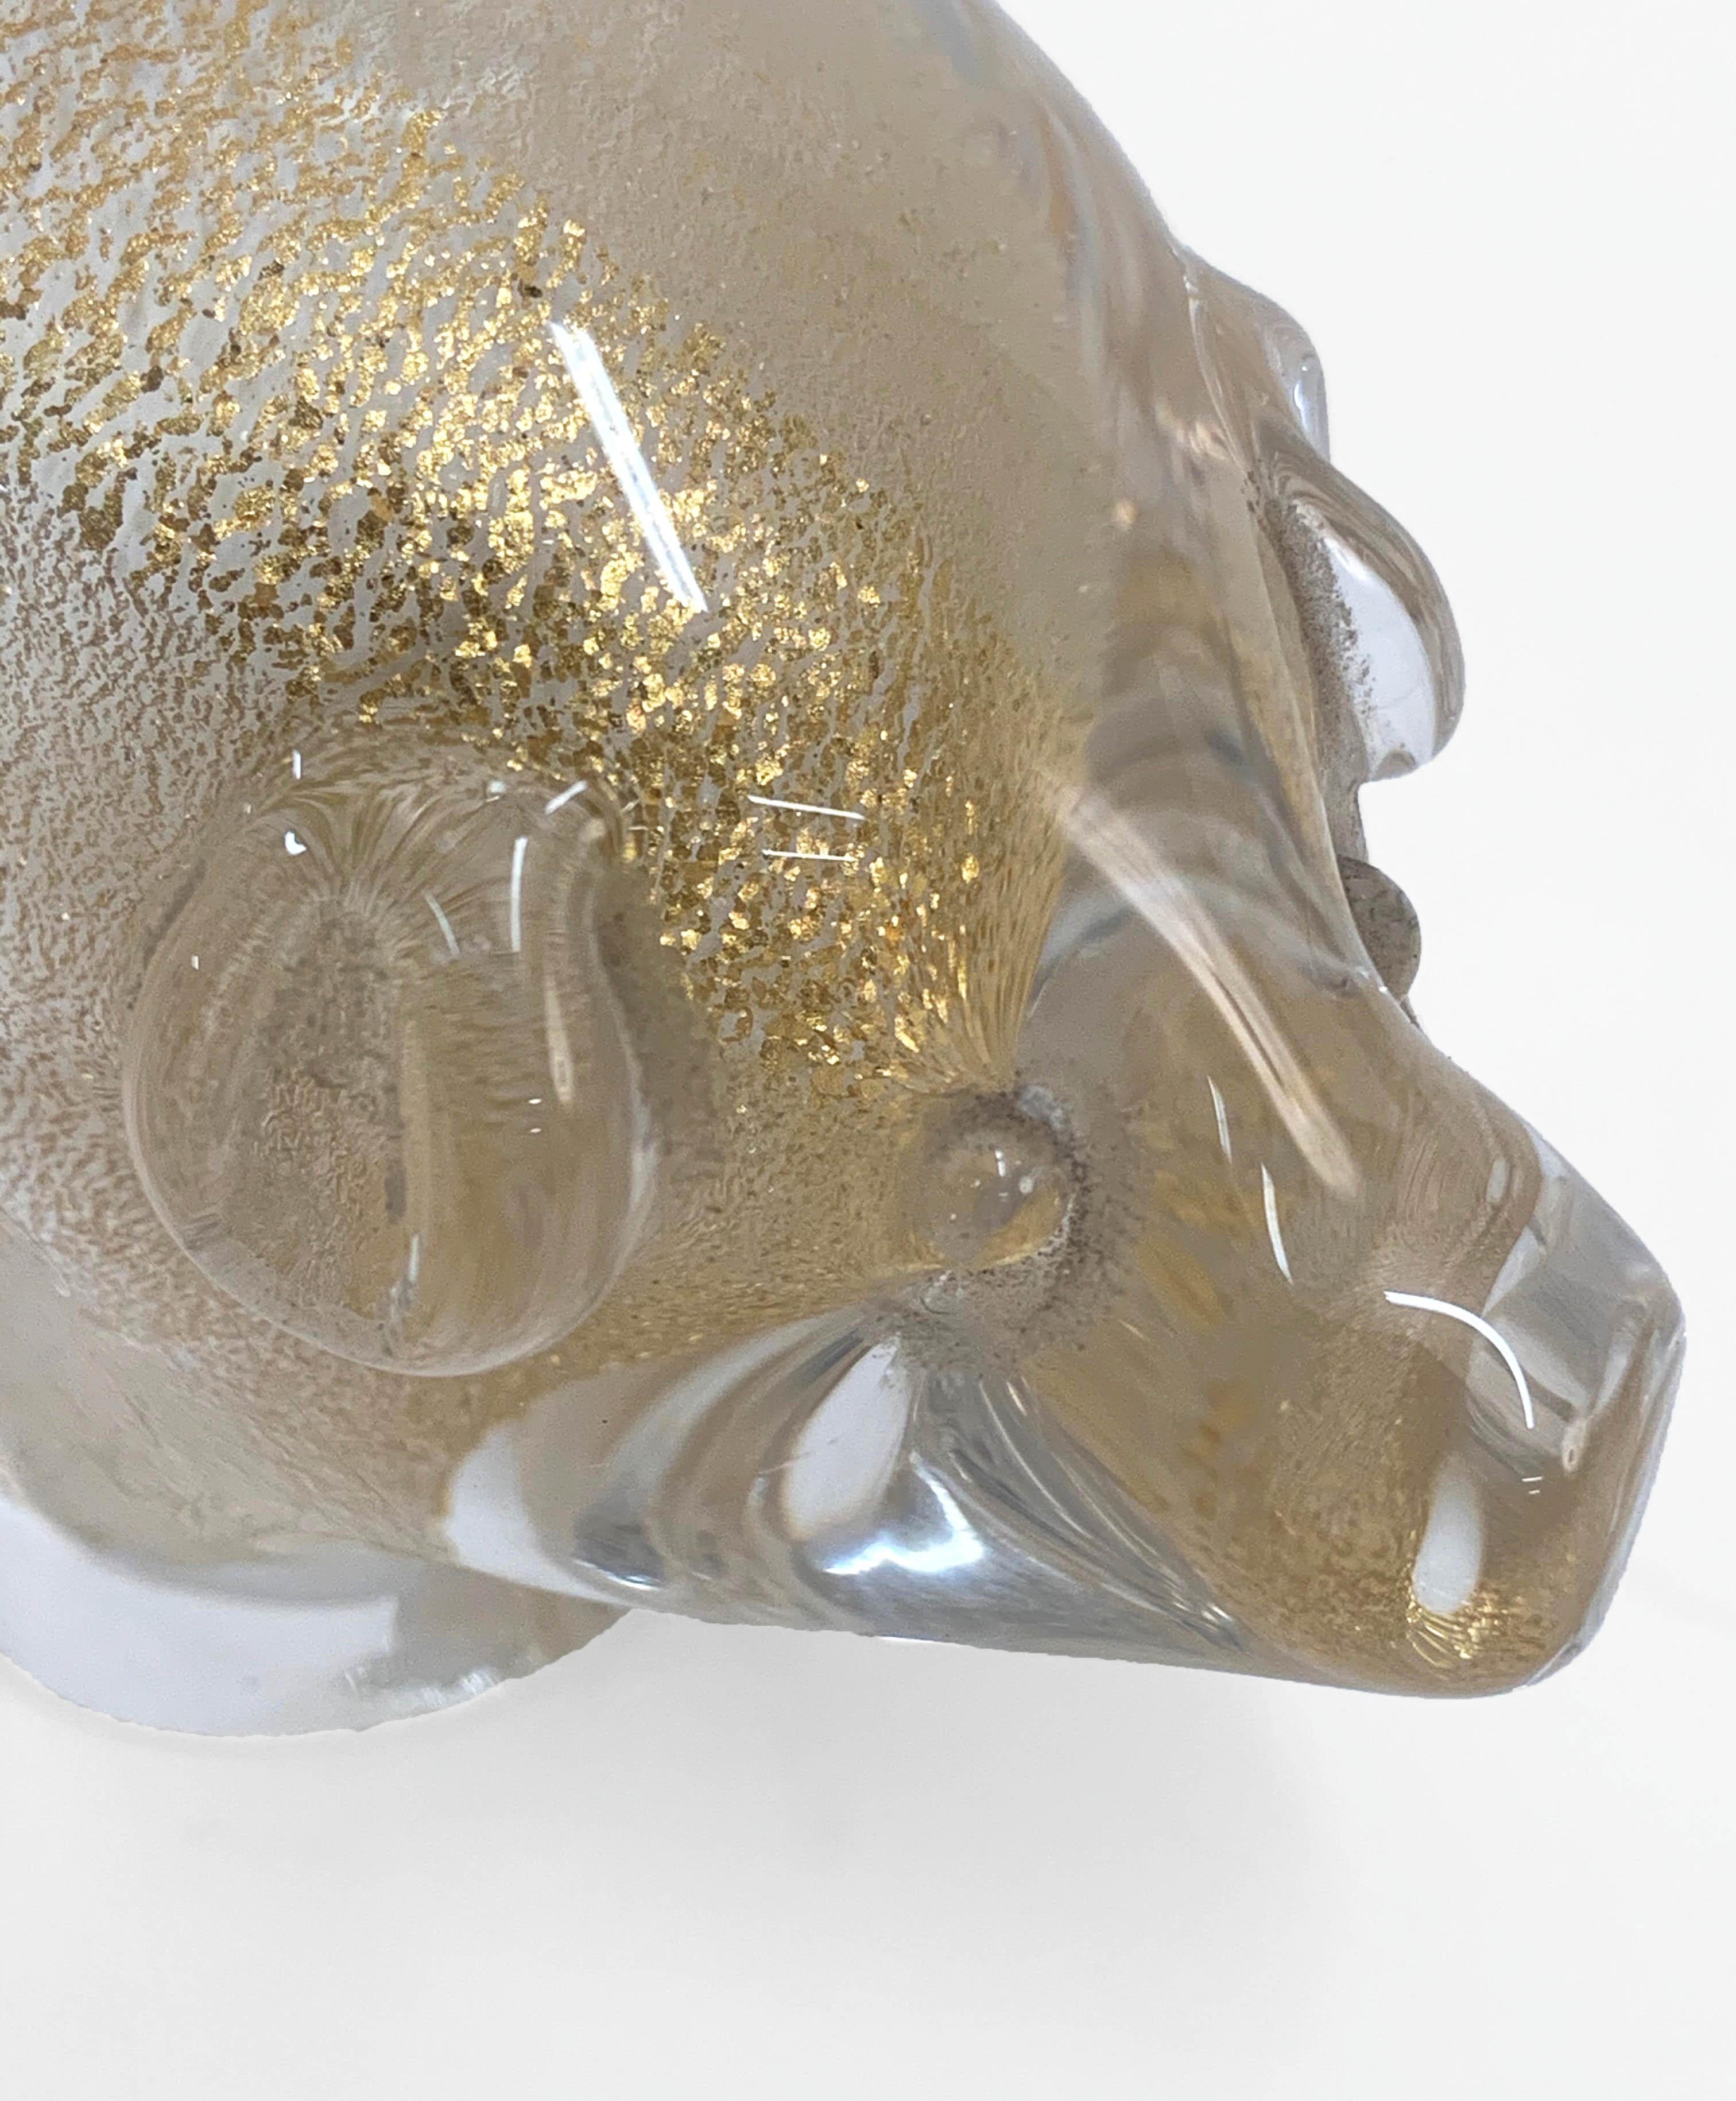 Archimede Seguso Midcentury Pig Murano Glass Italian Sculpture with Golden Dots 8